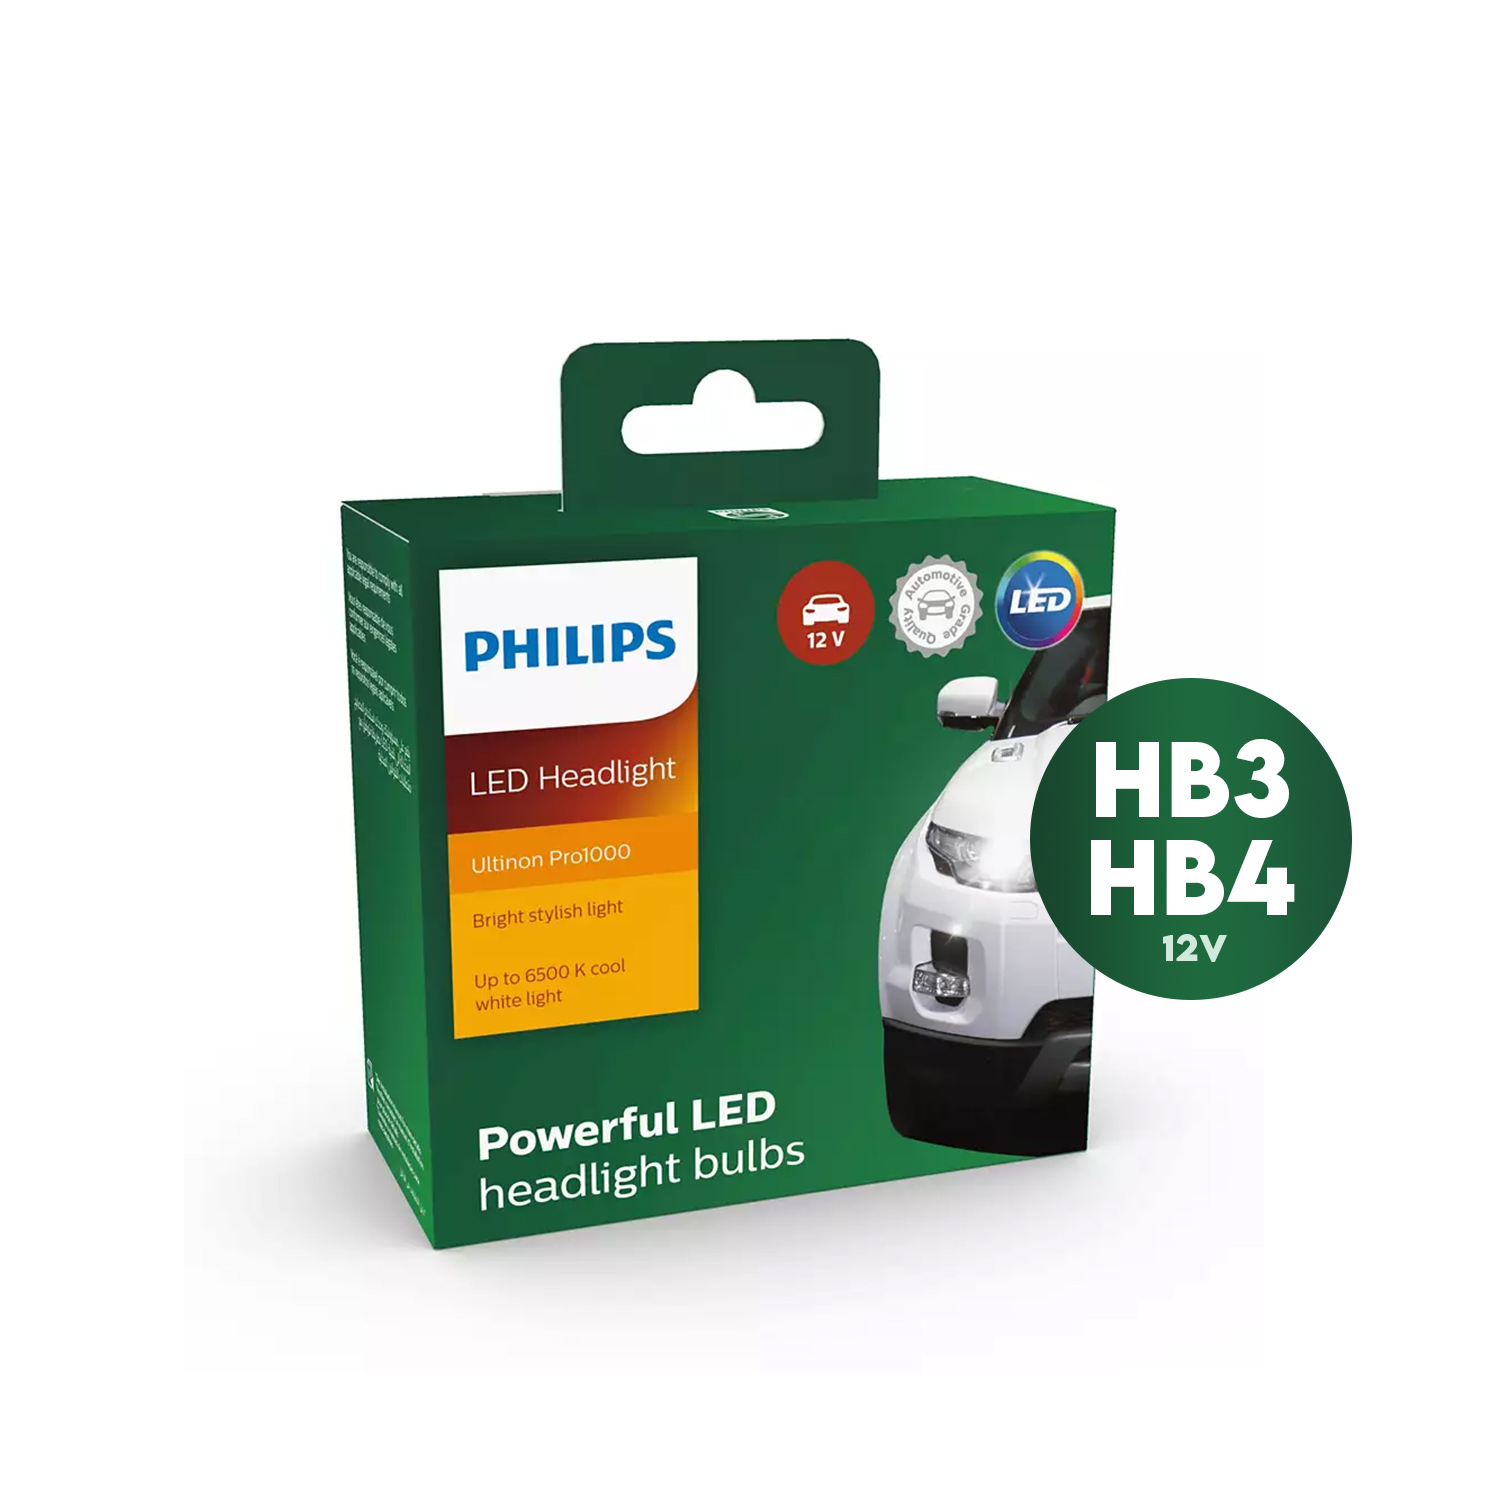 Philips Led Headlight Bulb Ultinon Pro1000 LED-HL HB3/HB4 Bright Stylish  Ligh, Up To 6500 K, Car Parts & Accessories, Lightings, Horns, and other  Electrical Parts and Accessories on Carousell